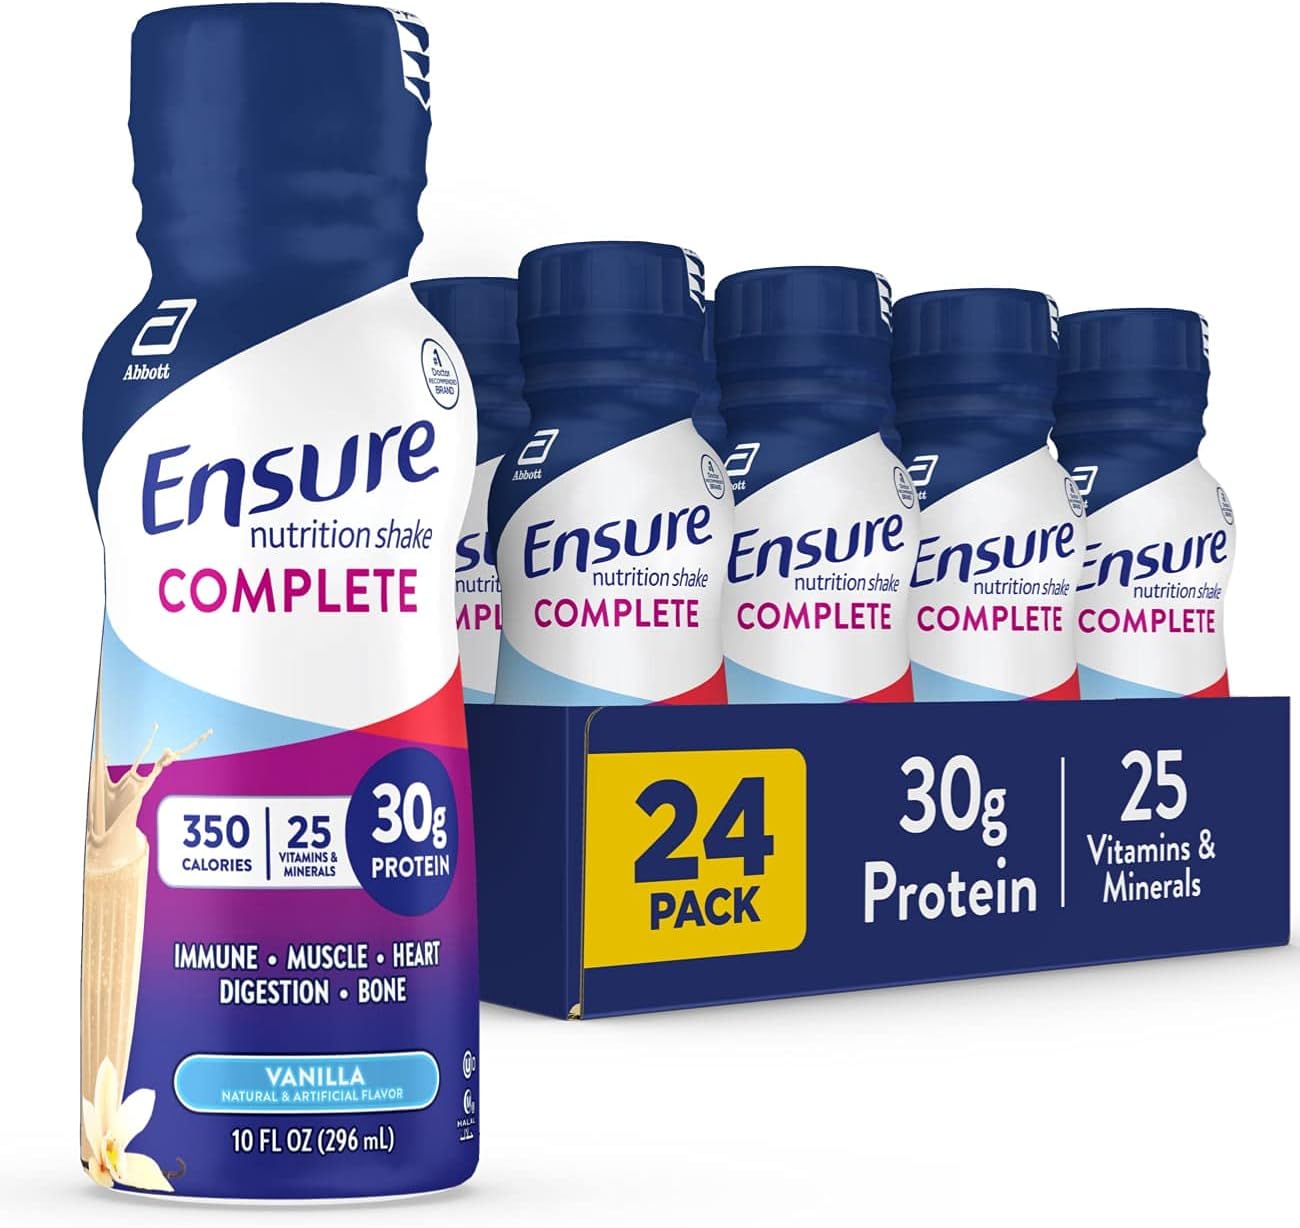 Ensure COMPLETE Nutrition Shake 30g of Protein Meal Replacement Shake